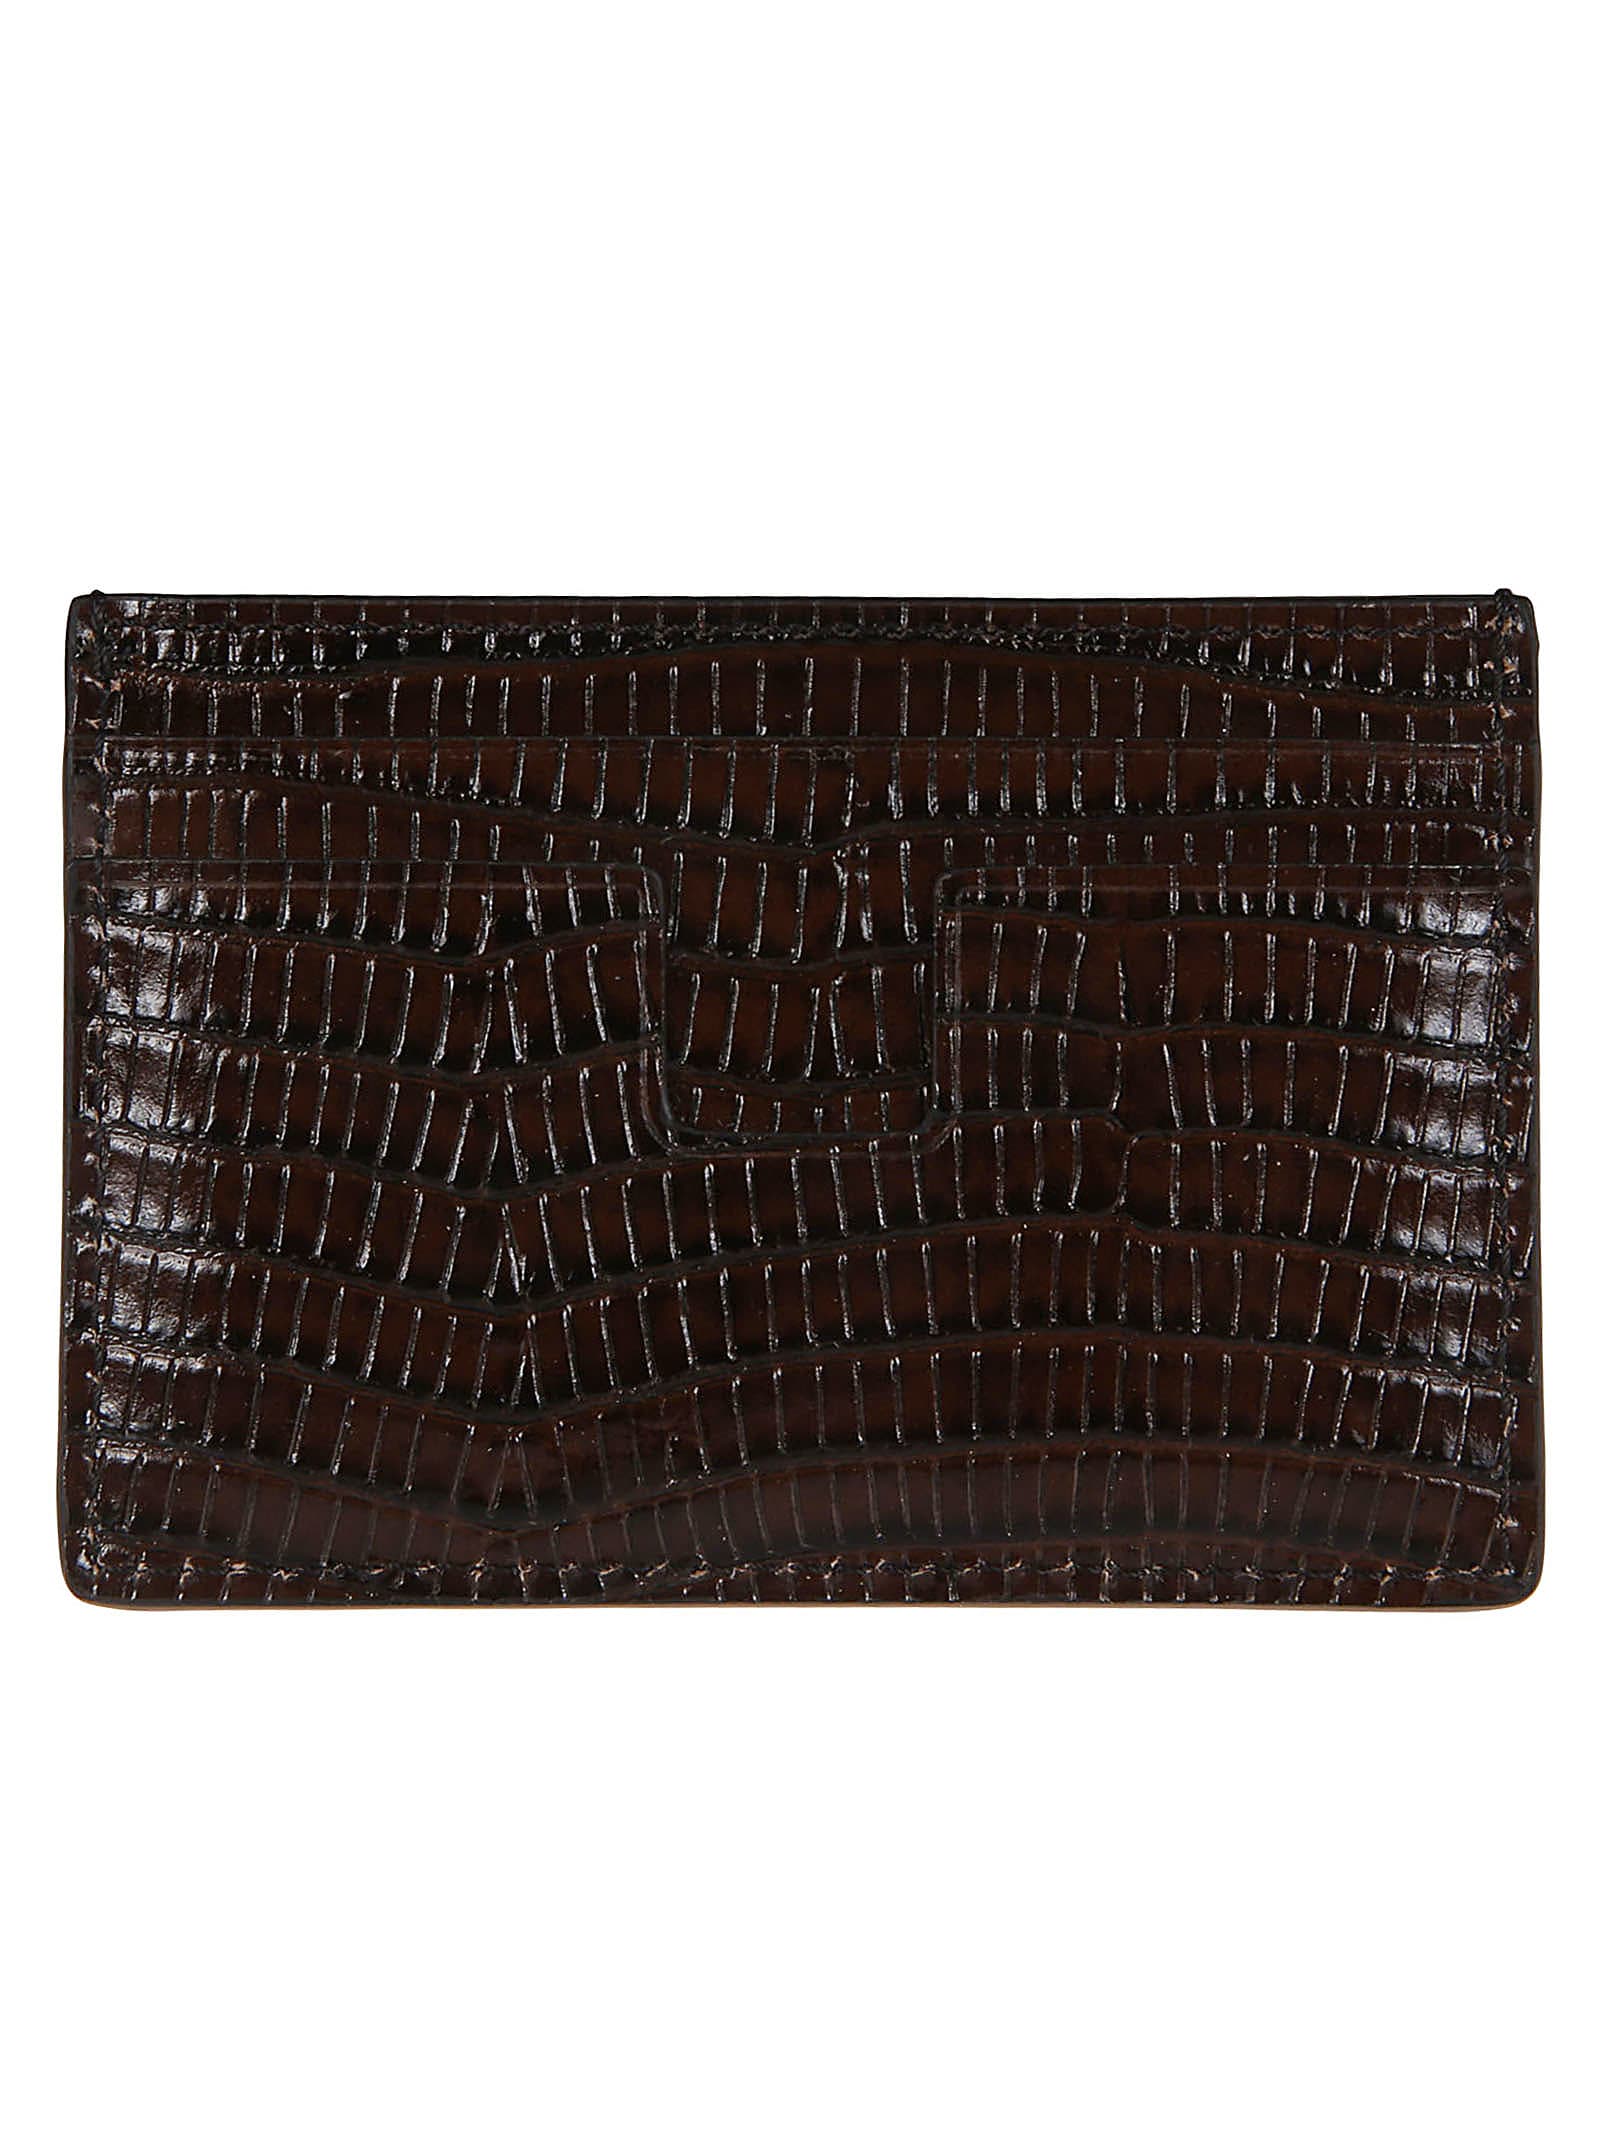 Shop Tom Ford Printed Alligator Classic Credit Card Holder In Chocolate Brown